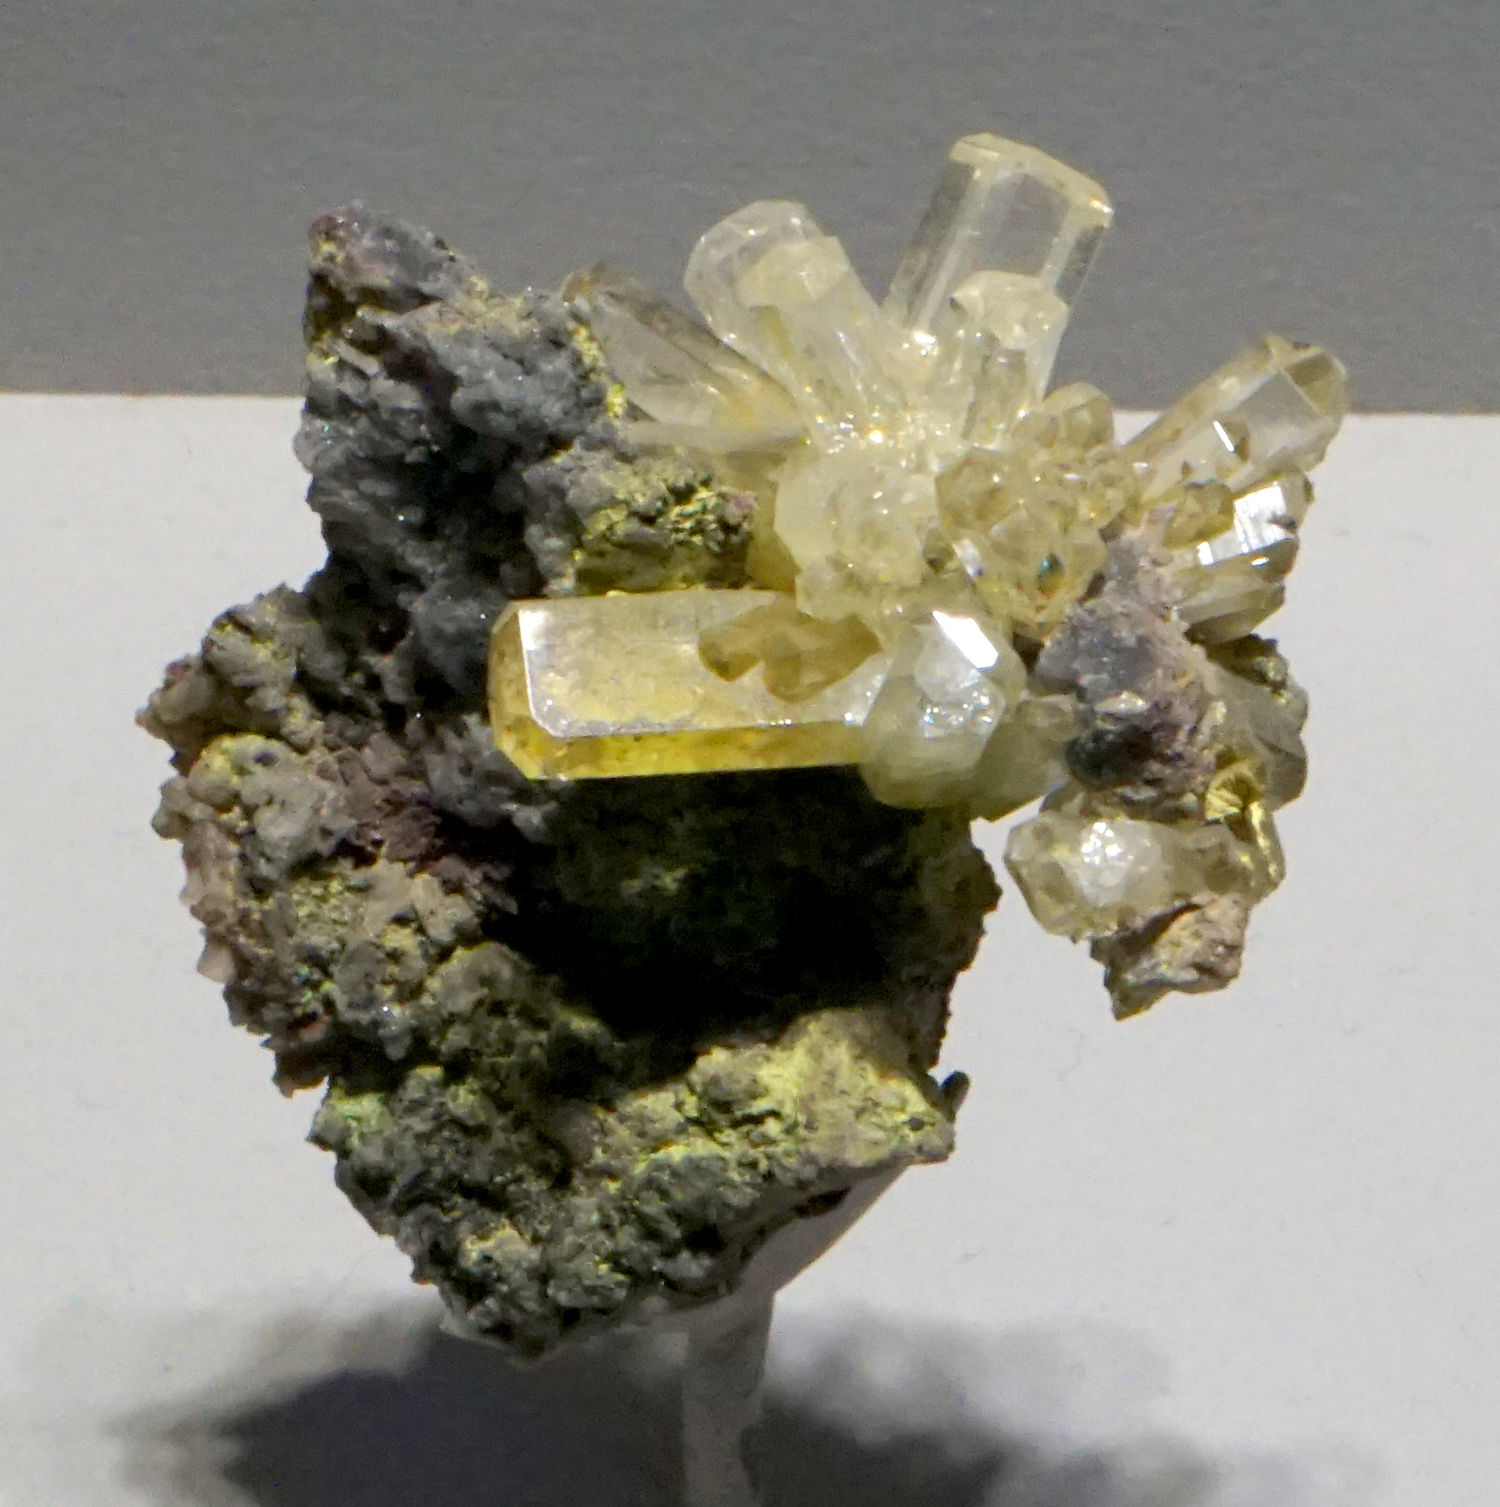 Transparent Mimetite Crystals from Tsumeb